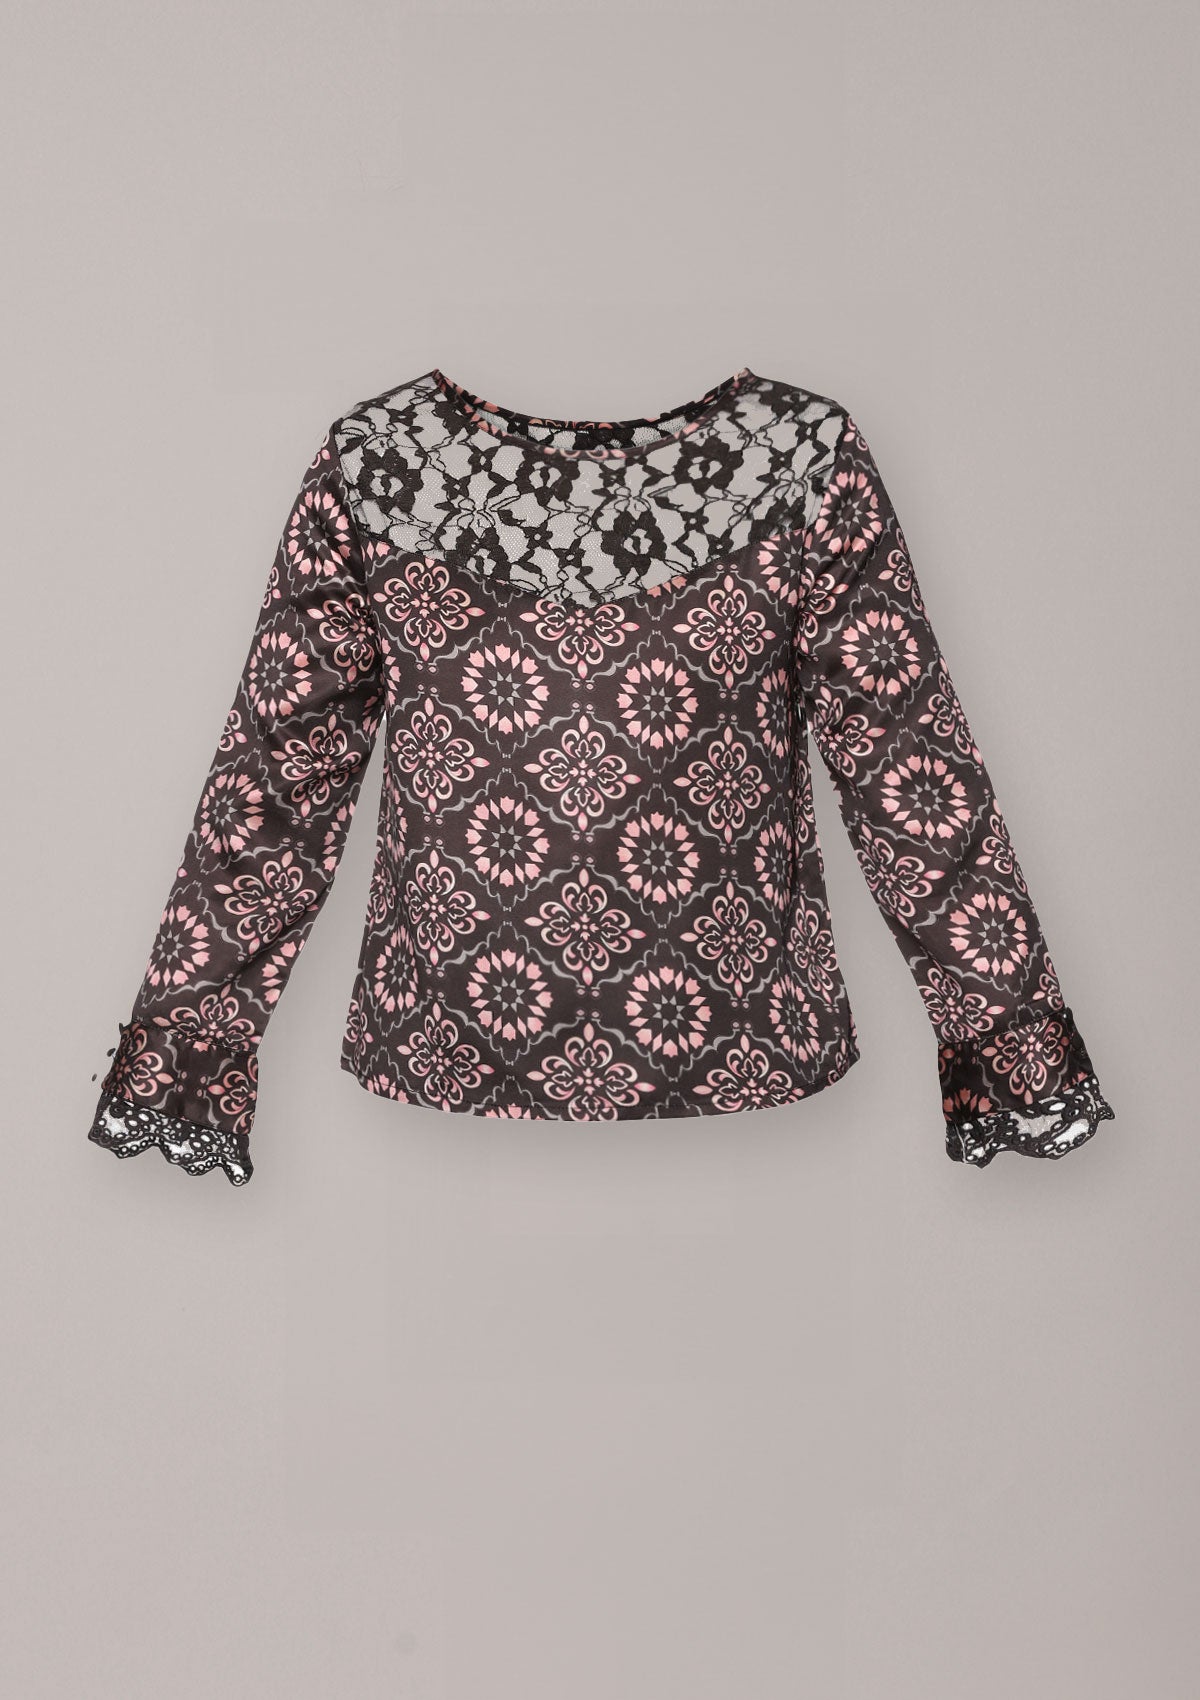 Jamila - Moroccan printed Lace accent blouse - IshqMe